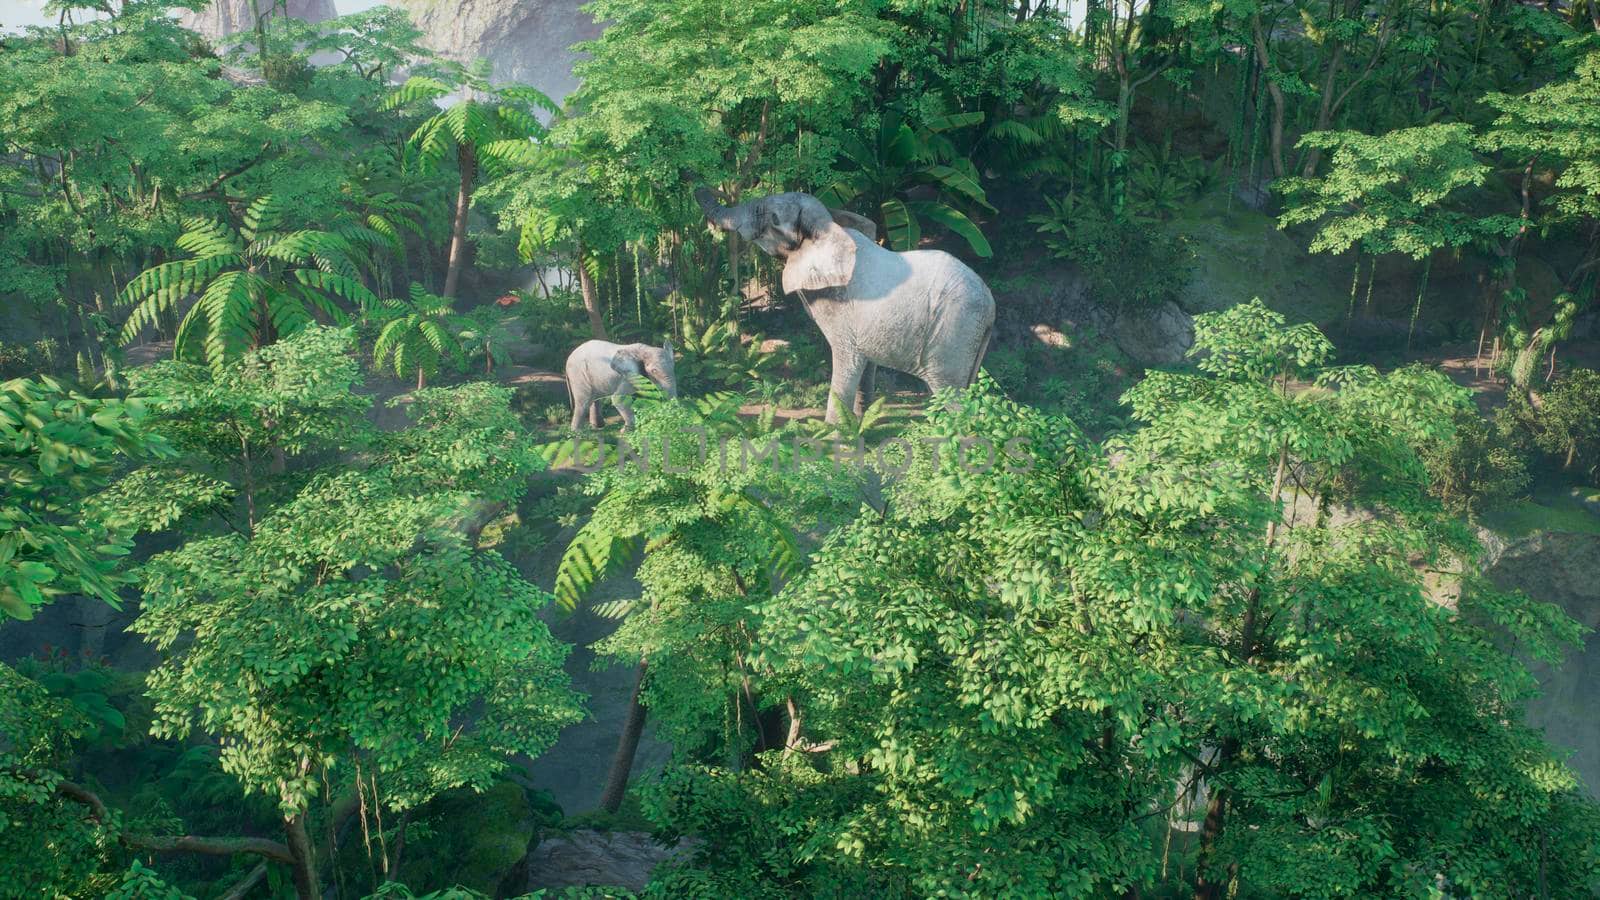 An African elephant with a baby elephant is eat plants in the green jungle. A look at the African jungle.